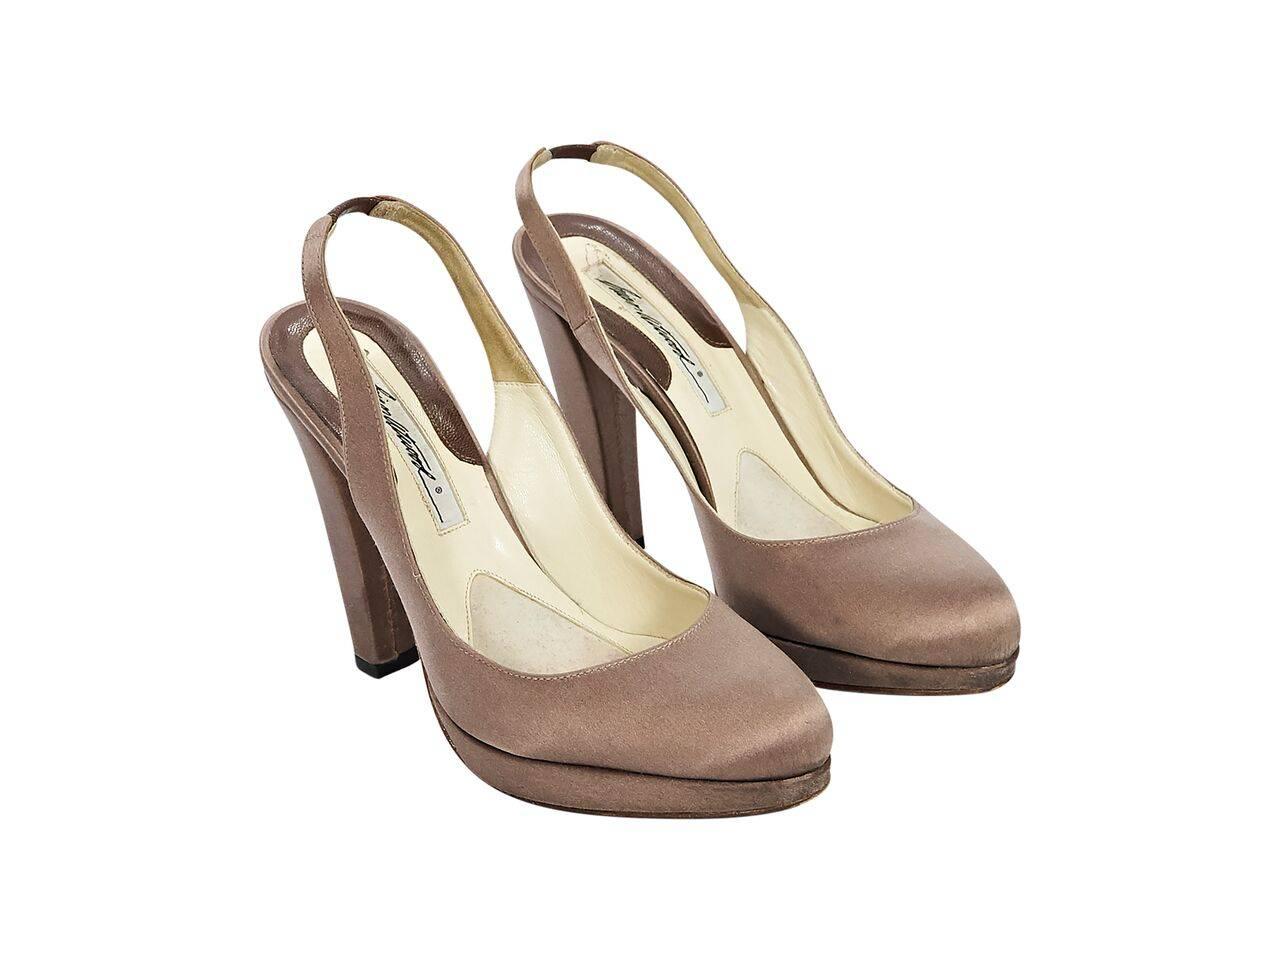 Product details:  Taupe satin slingback platform pumps by Brian Atwood.  Slingback strap with inset elastic panel.  Round toe.  Round toe.  
Condition: Pre-owned. Very good.
Est. Retail $ 548.00